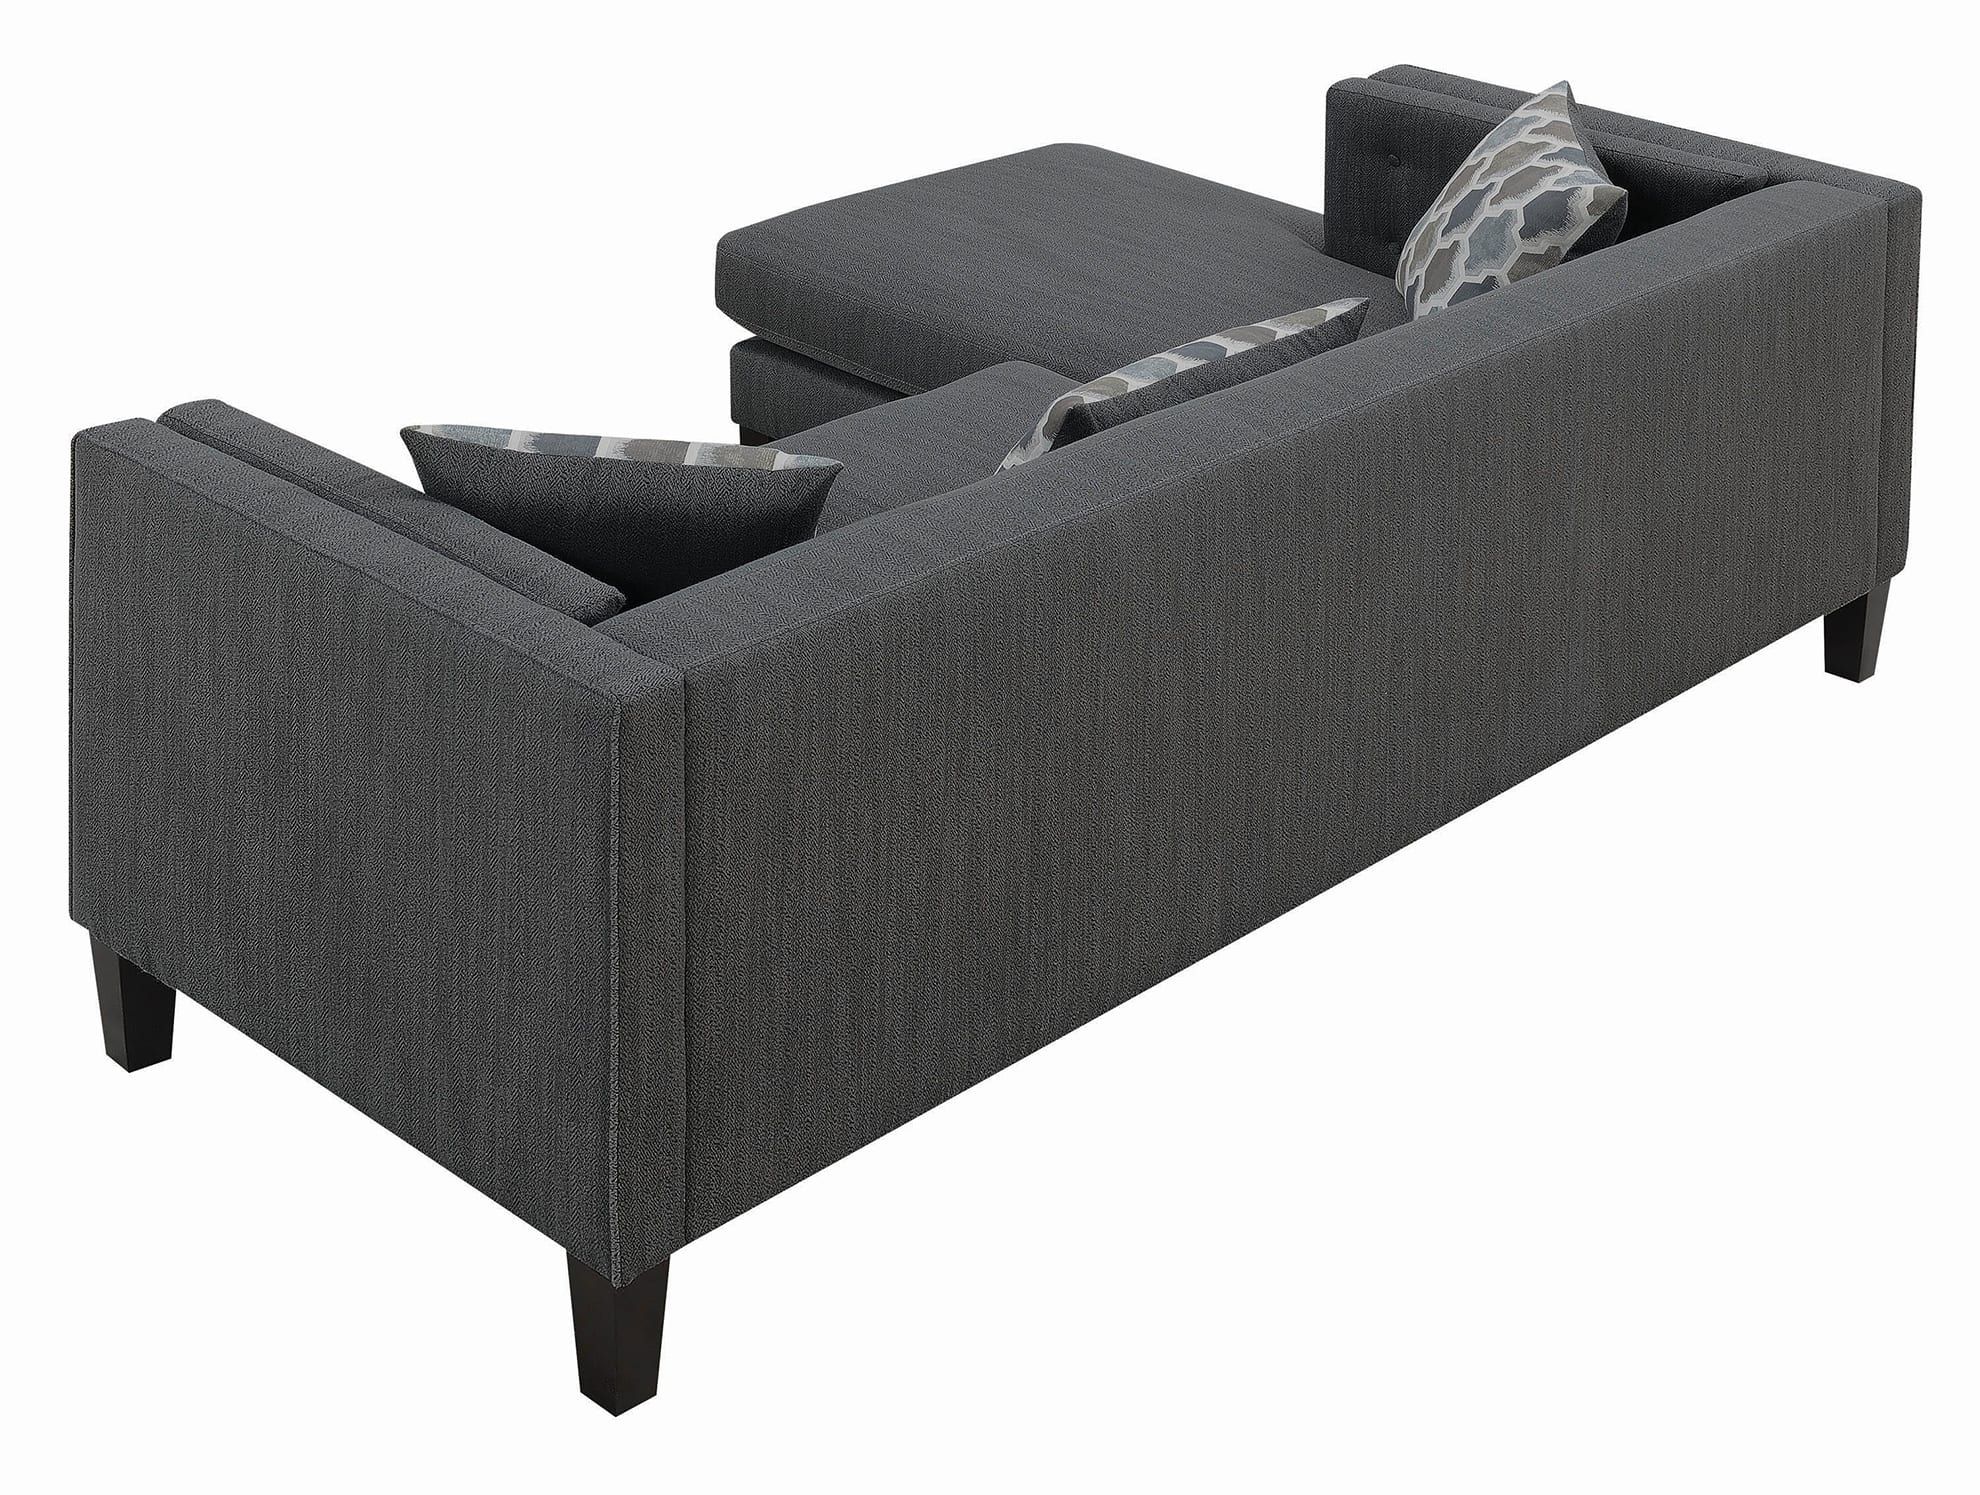 Sawyer Contemporary Dusty Blue Sectional | Quality Throughout Brayson Chaise Sectional Sofas Dusty Blue (View 10 of 15)